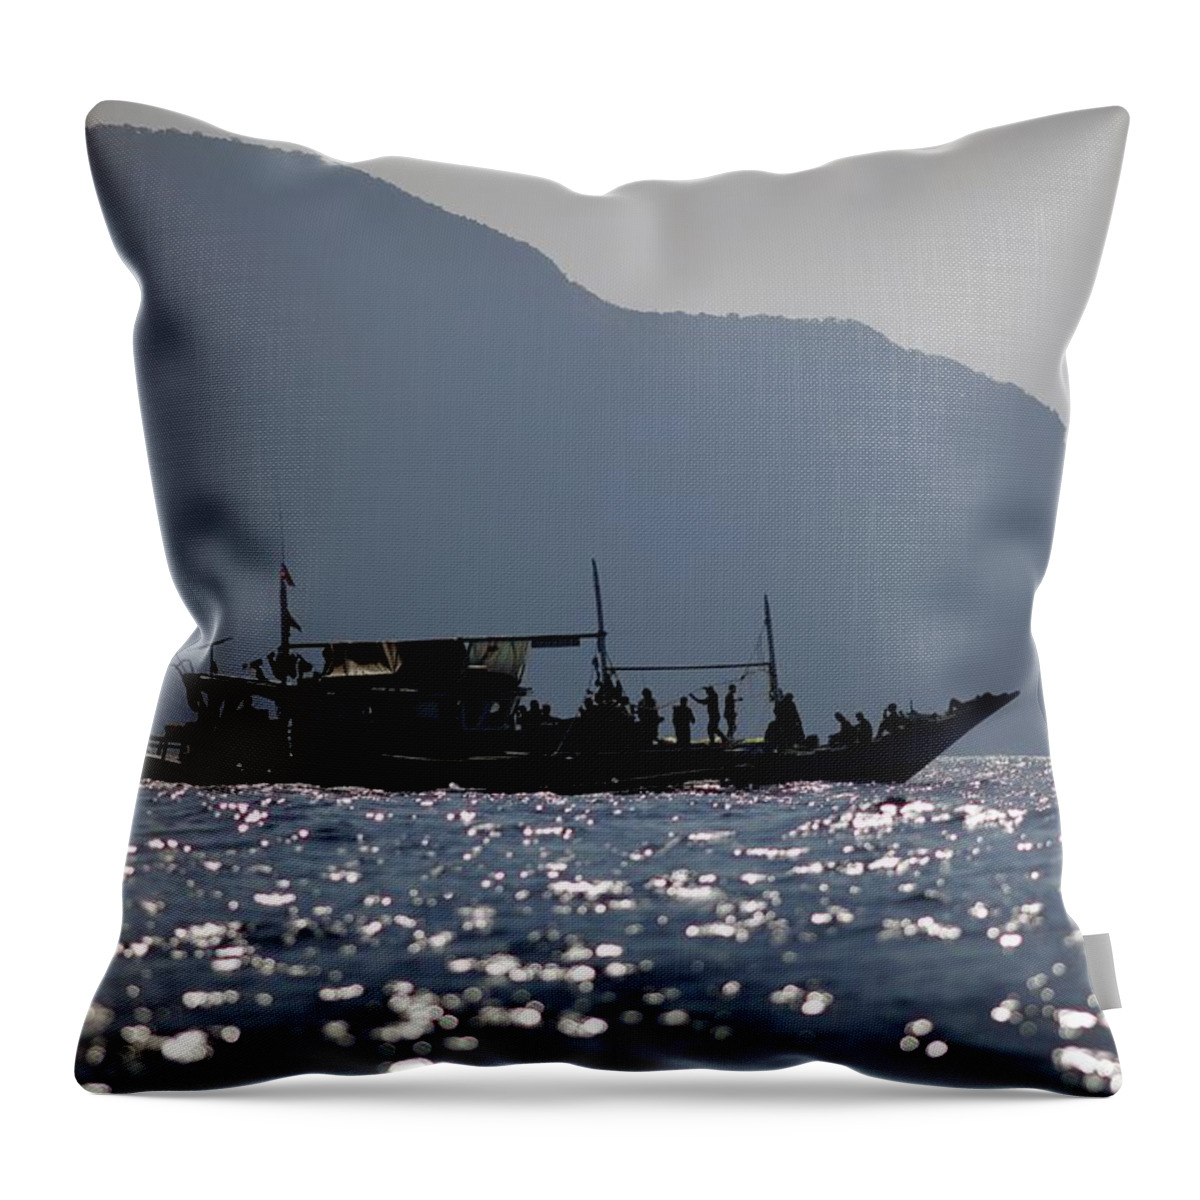 People Throw Pillow featuring the photograph Silhouette Of Pa Aling Fishing Boat At by Timothy Allen